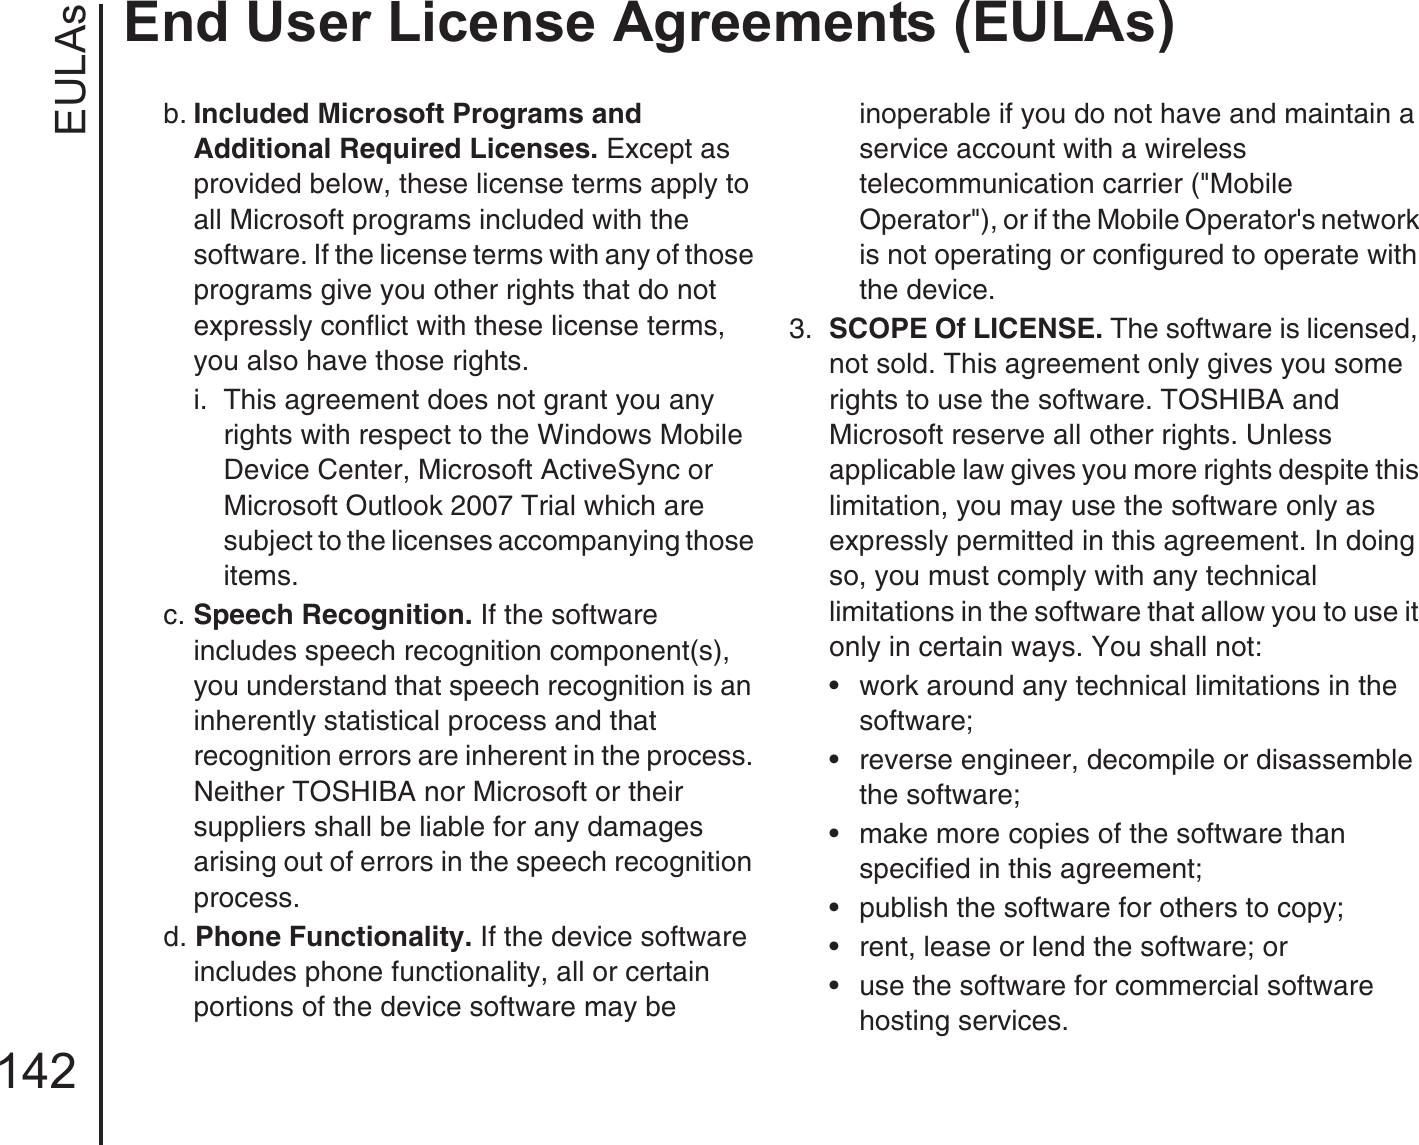 EULAsEnd User License Agreements (EULAs)142b. Included Microsoft Programs and Additional Required Licenses. Except as provided below, these license terms apply to all Microsoft programs included with the software. If the license terms with any of those programs give you other rights that do not expressly conflict with these license terms, you also have those rights.i.  This agreement does not grant you any rights with respect to the Windows Mobile Device Center, Microsoft ActiveSync or Microsoft Outlook 2007 Trial which are subject to the licenses accompanying those items.c. Speech Recognition. If the software includes speech recognition component(s), you understand that speech recognition is an inherently statistical process and that recognition errors are inherent in the process. Neither TOSHIBA nor Microsoft or their suppliers shall be liable for any damages arising out of errors in the speech recognition process.d. Phone Functionality. If the device software includes phone functionality, all or certain portions of the device software may be inoperable if you do not have and maintain a service account with a wireless telecommunication carrier (&quot;Mobile Operator&quot;), or if the Mobile Operator&apos;s network is not operating or configured to operate with the device.3.  SCOPE Of LICENSE. The software is licensed, not sold. This agreement only gives you some rights to use the software. TOSHIBA and Microsoft reserve all other rights. Unless applicable law gives you more rights despite this limitation, you may use the software only as expressly permitted in this agreement. In doing so, you must comply with any technical limitations in the software that allow you to use it only in certain ways. You shall not:• work around any technical limitations in the software;• reverse engineer, decompile or disassemble the software;• make more copies of the software than specified in this agreement;• publish the software for others to copy;• rent, lease or lend the software; or• use the software for commercial software hosting services.